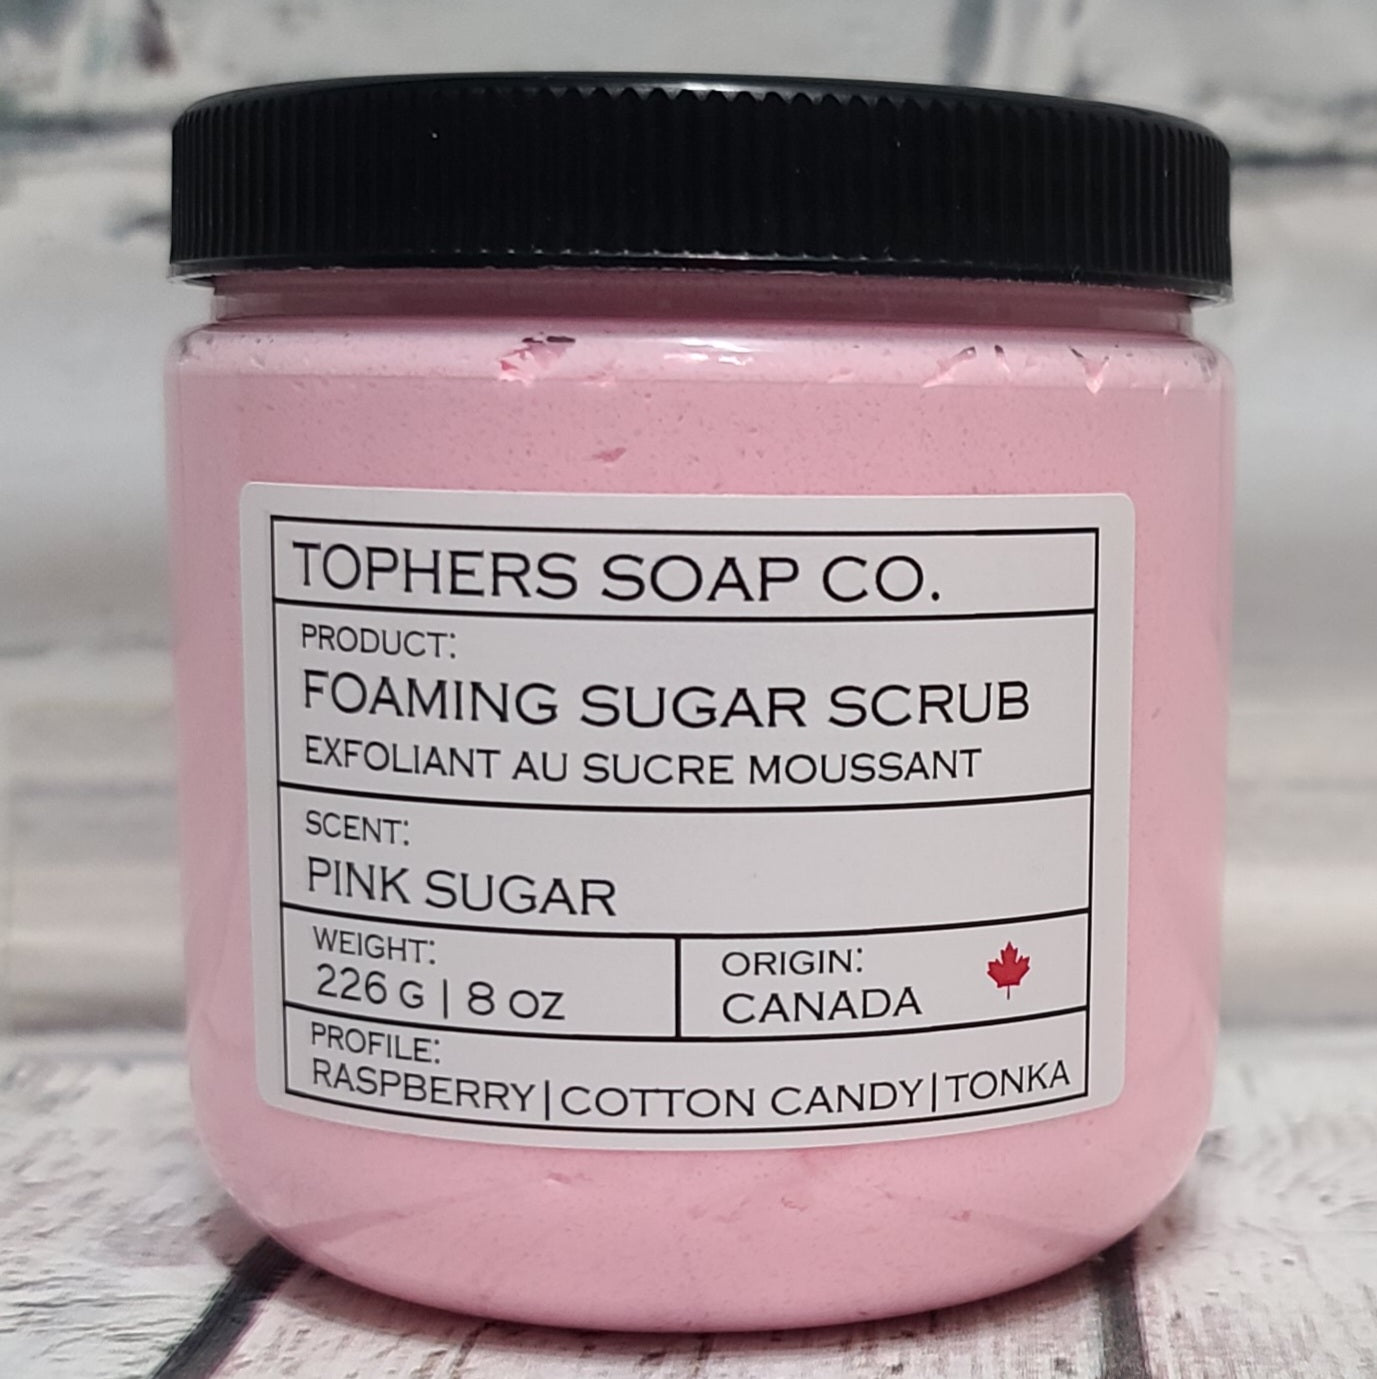 Light Pink  sugar scrub in a clear jar with a black lid against a white brick background